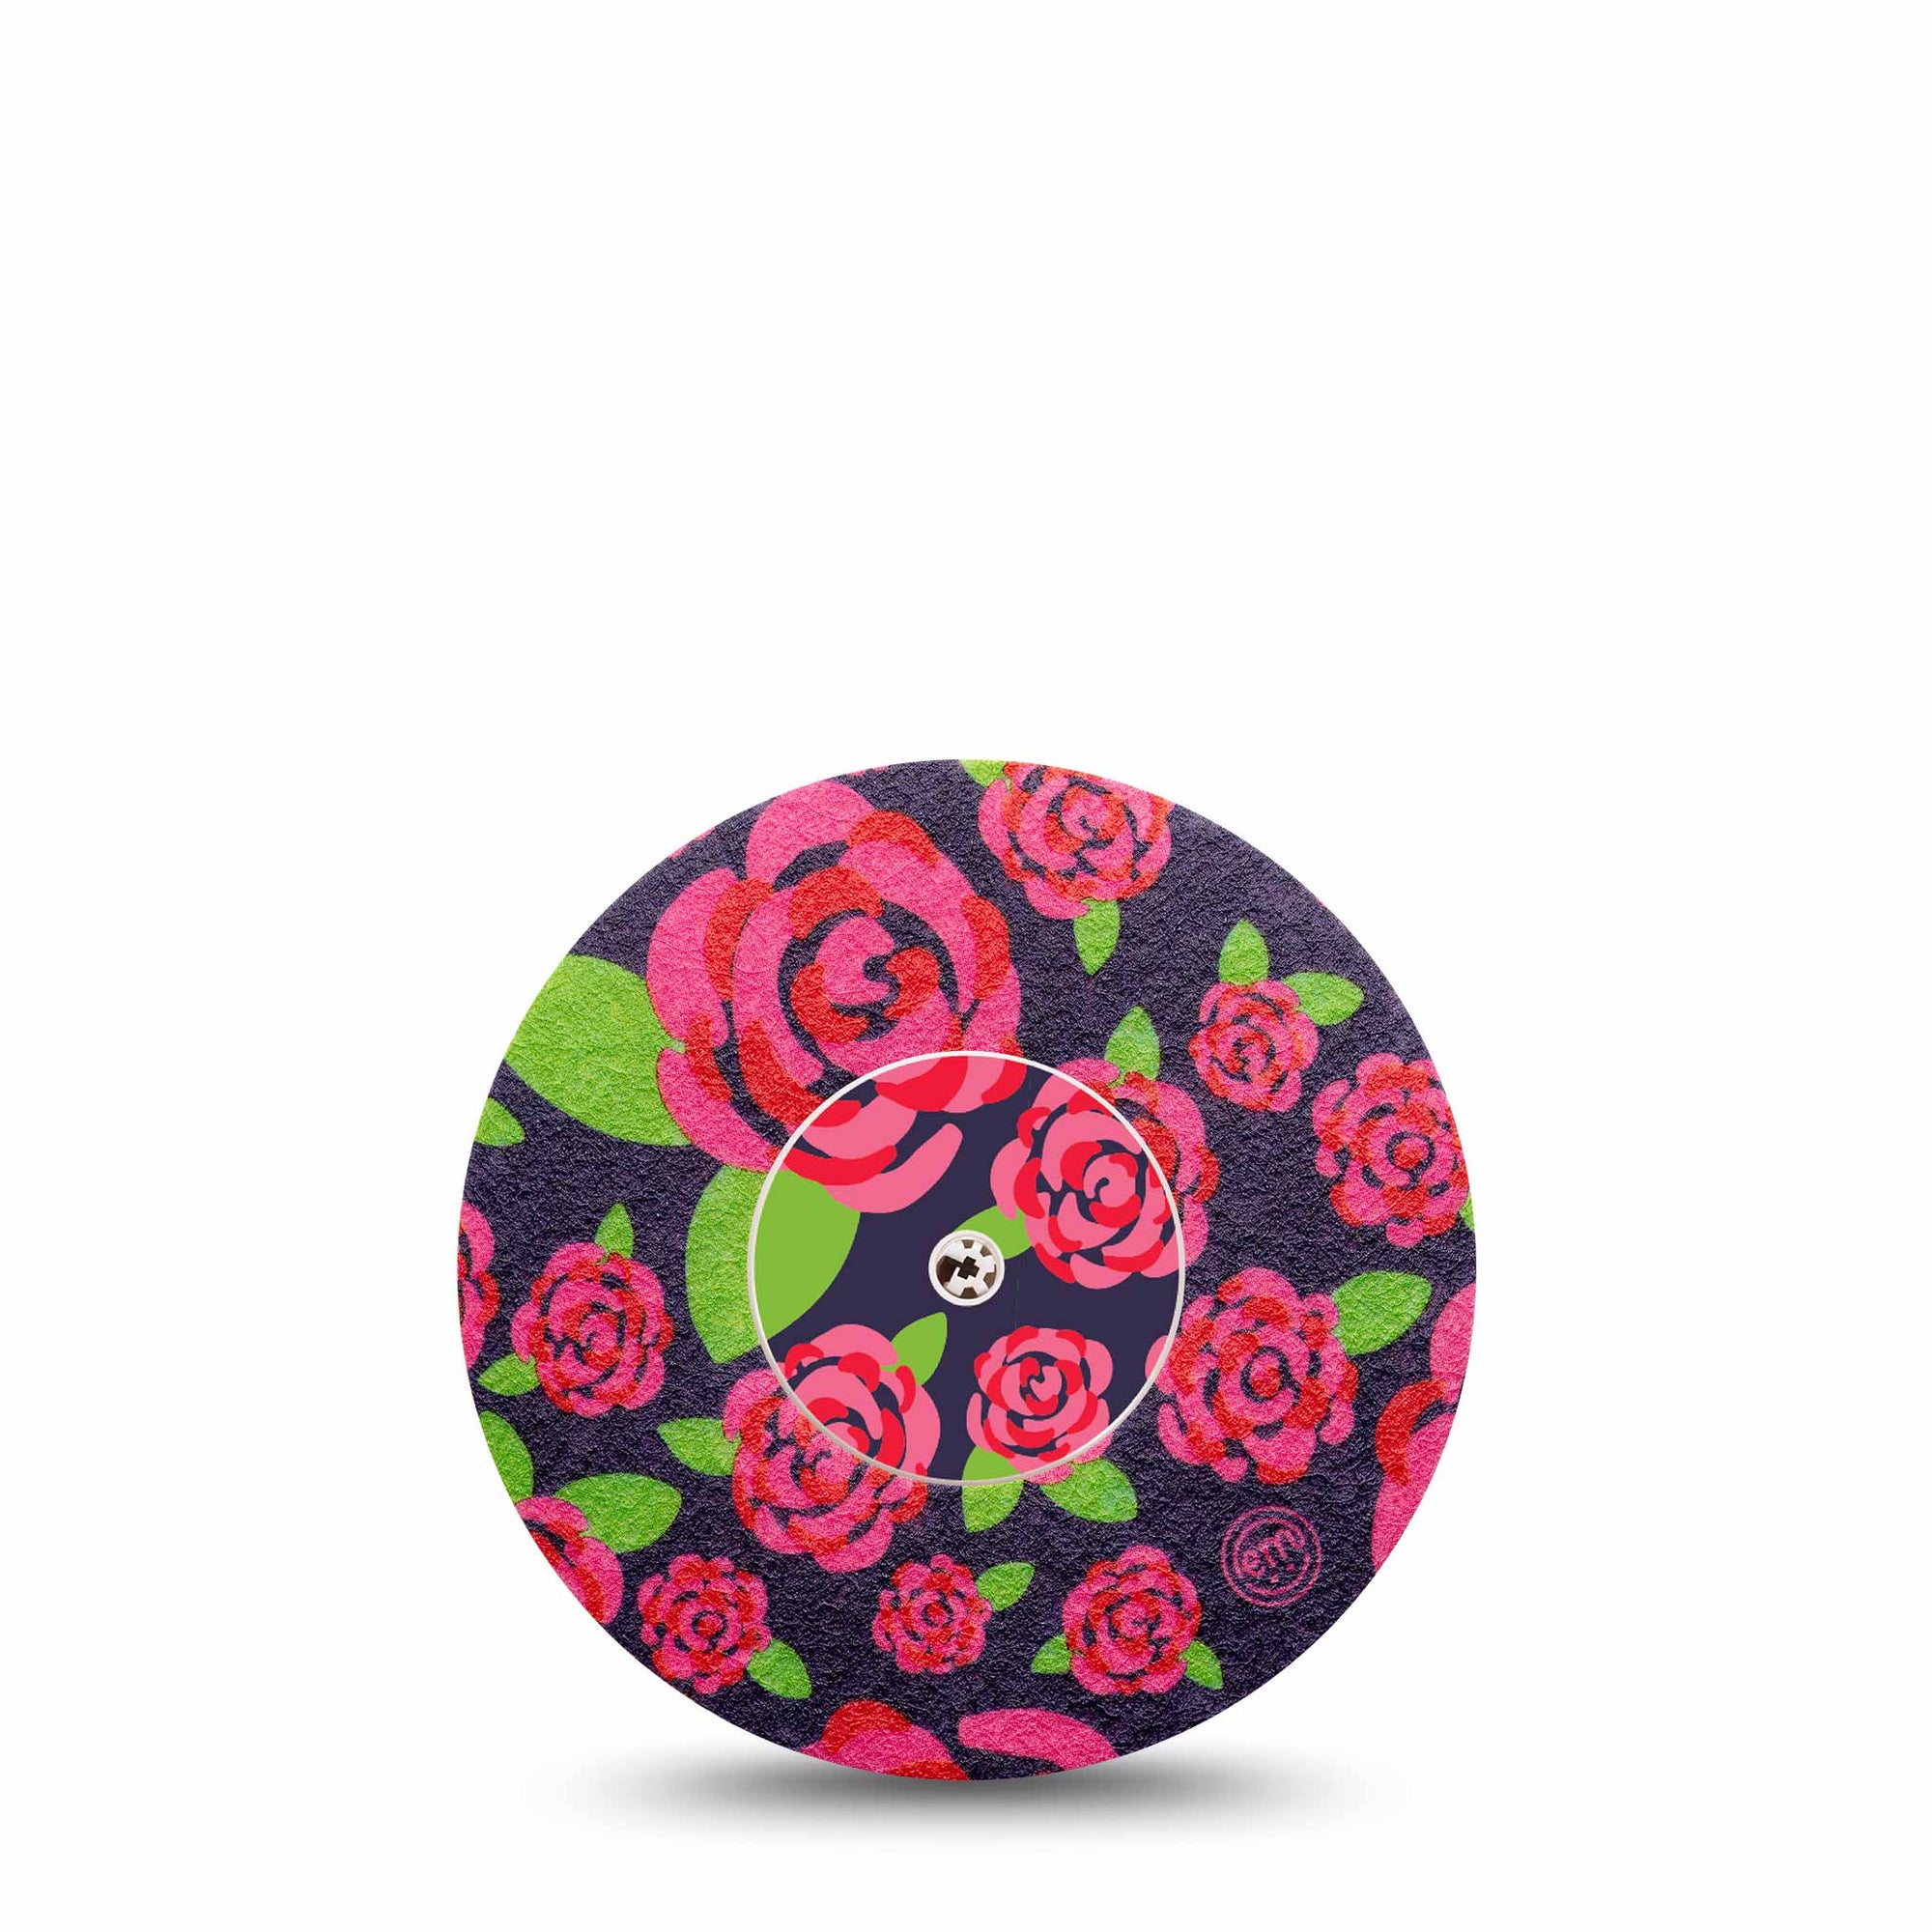 ExpressionMed Pretty Pink Roses Libre Transmitter Sticker, Abbott Lingo